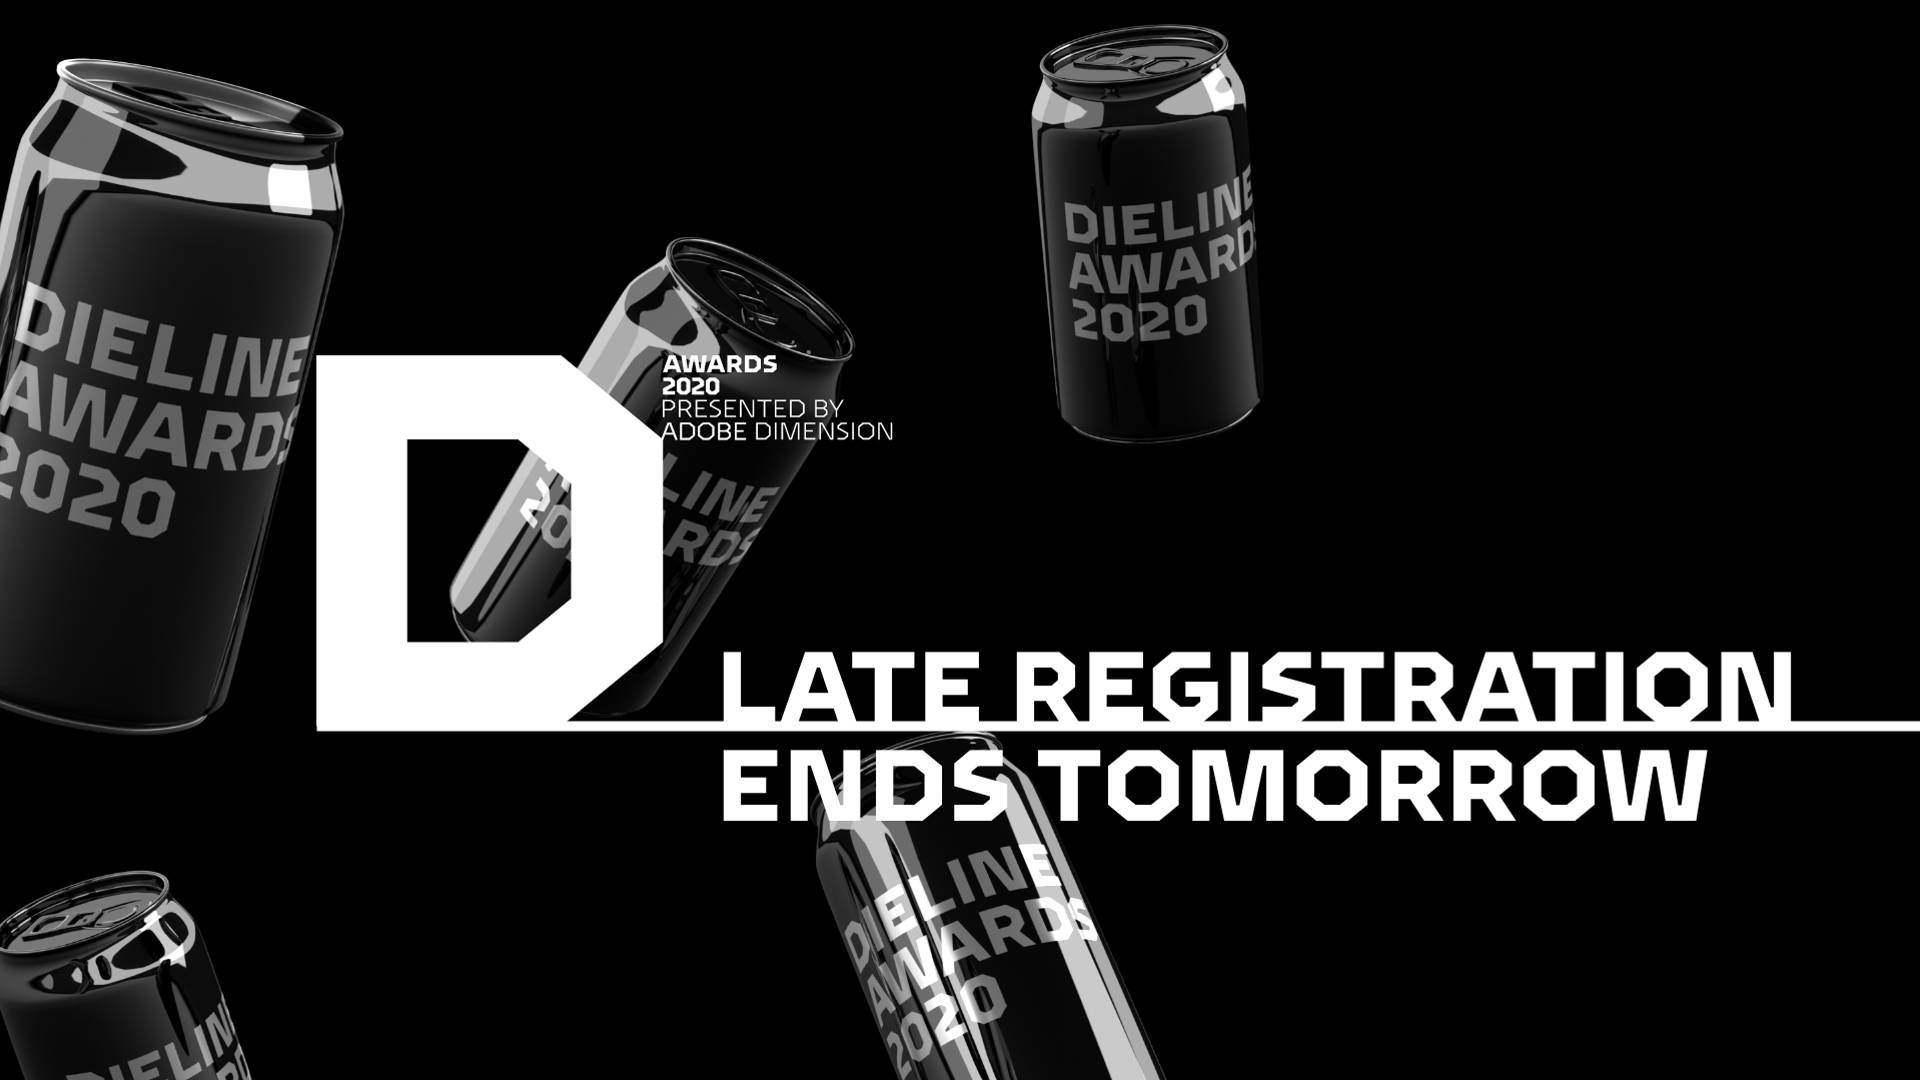 Featured image for DIELINE AWARDS 2020: TOMORROW IS THE LAST DAY OF LATE REGISTRATION